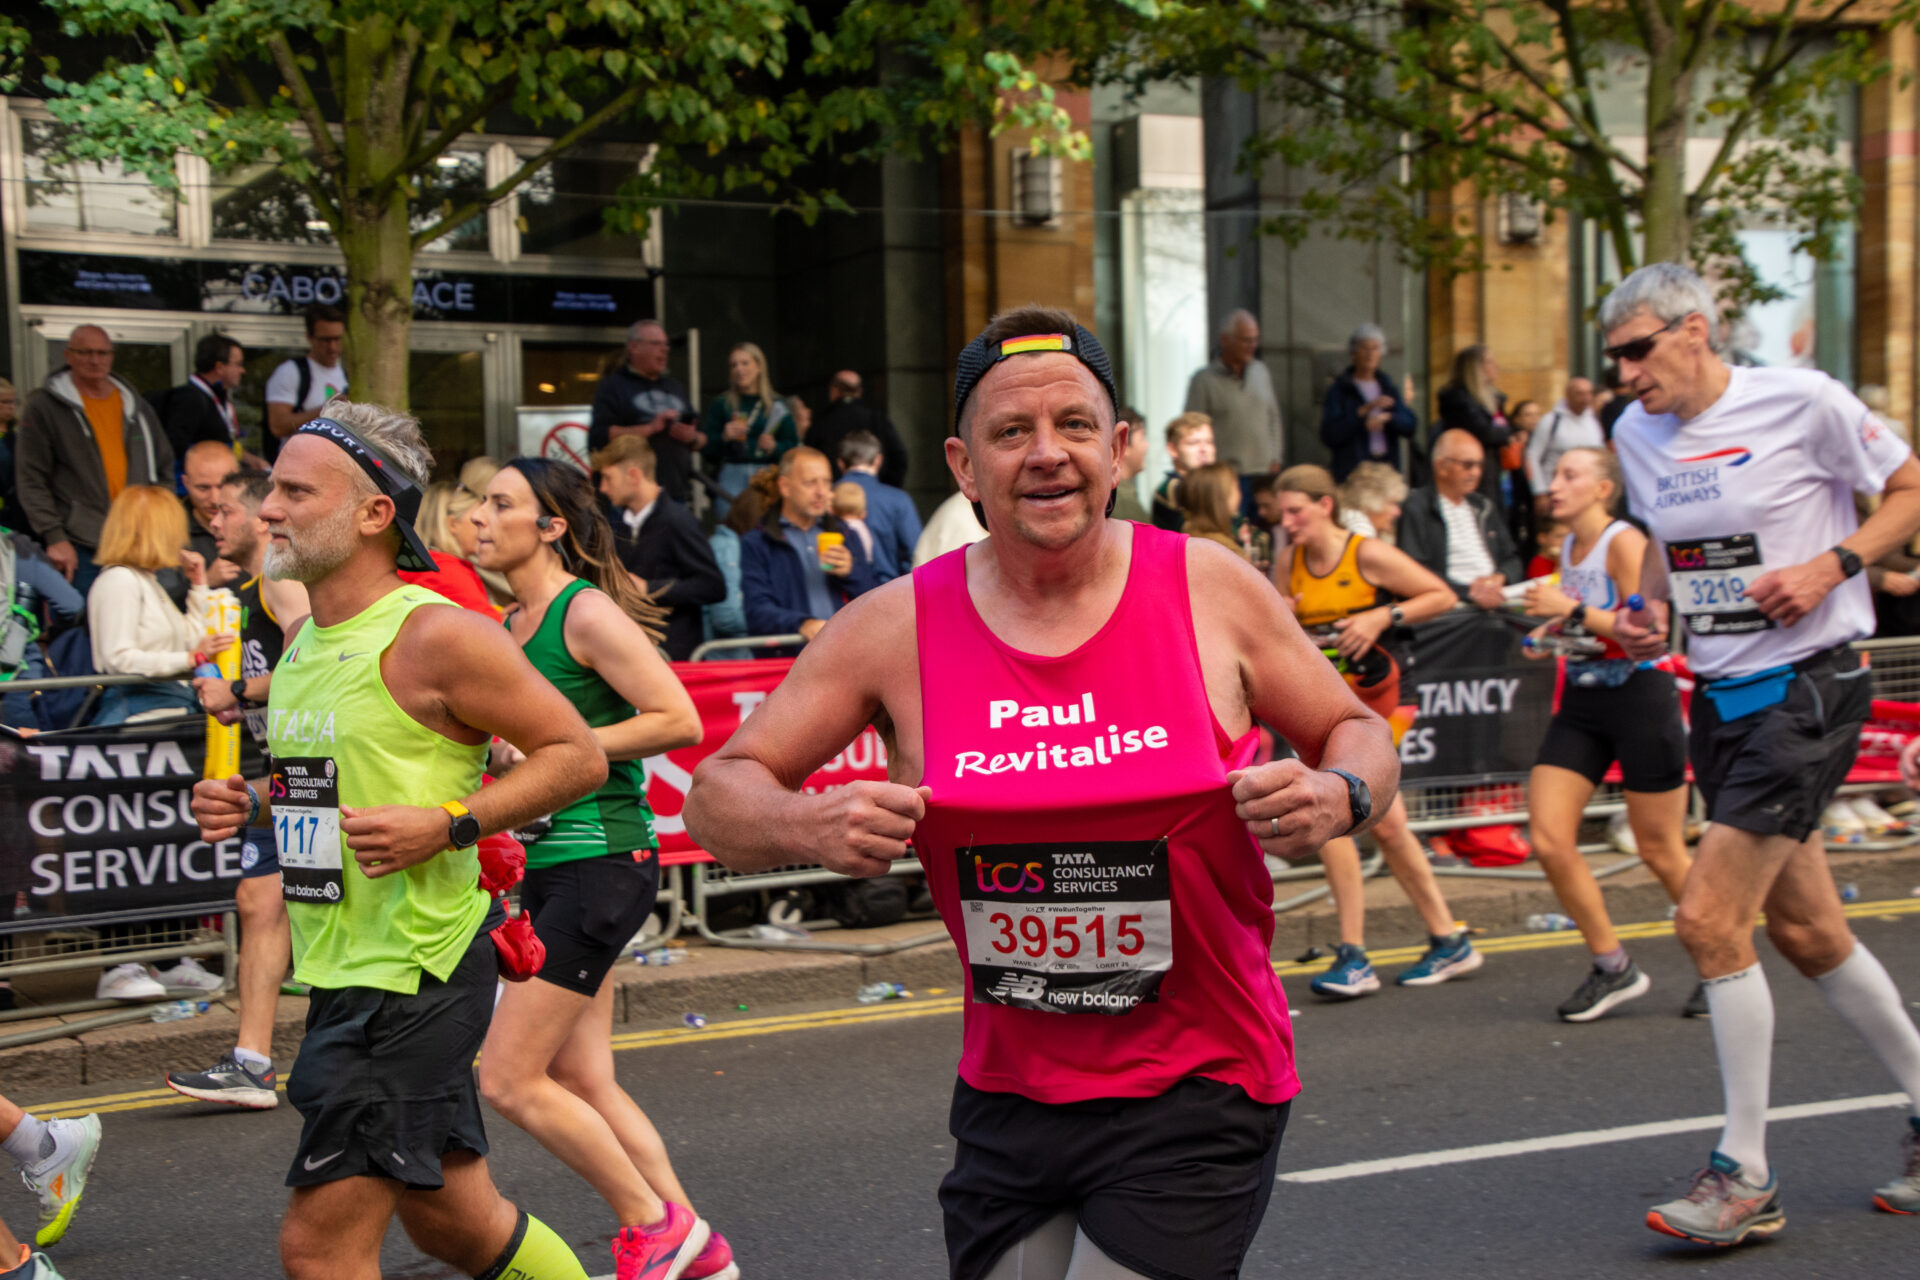 Man running the London Marathon holding his pink jersey to display the Revitalise logo